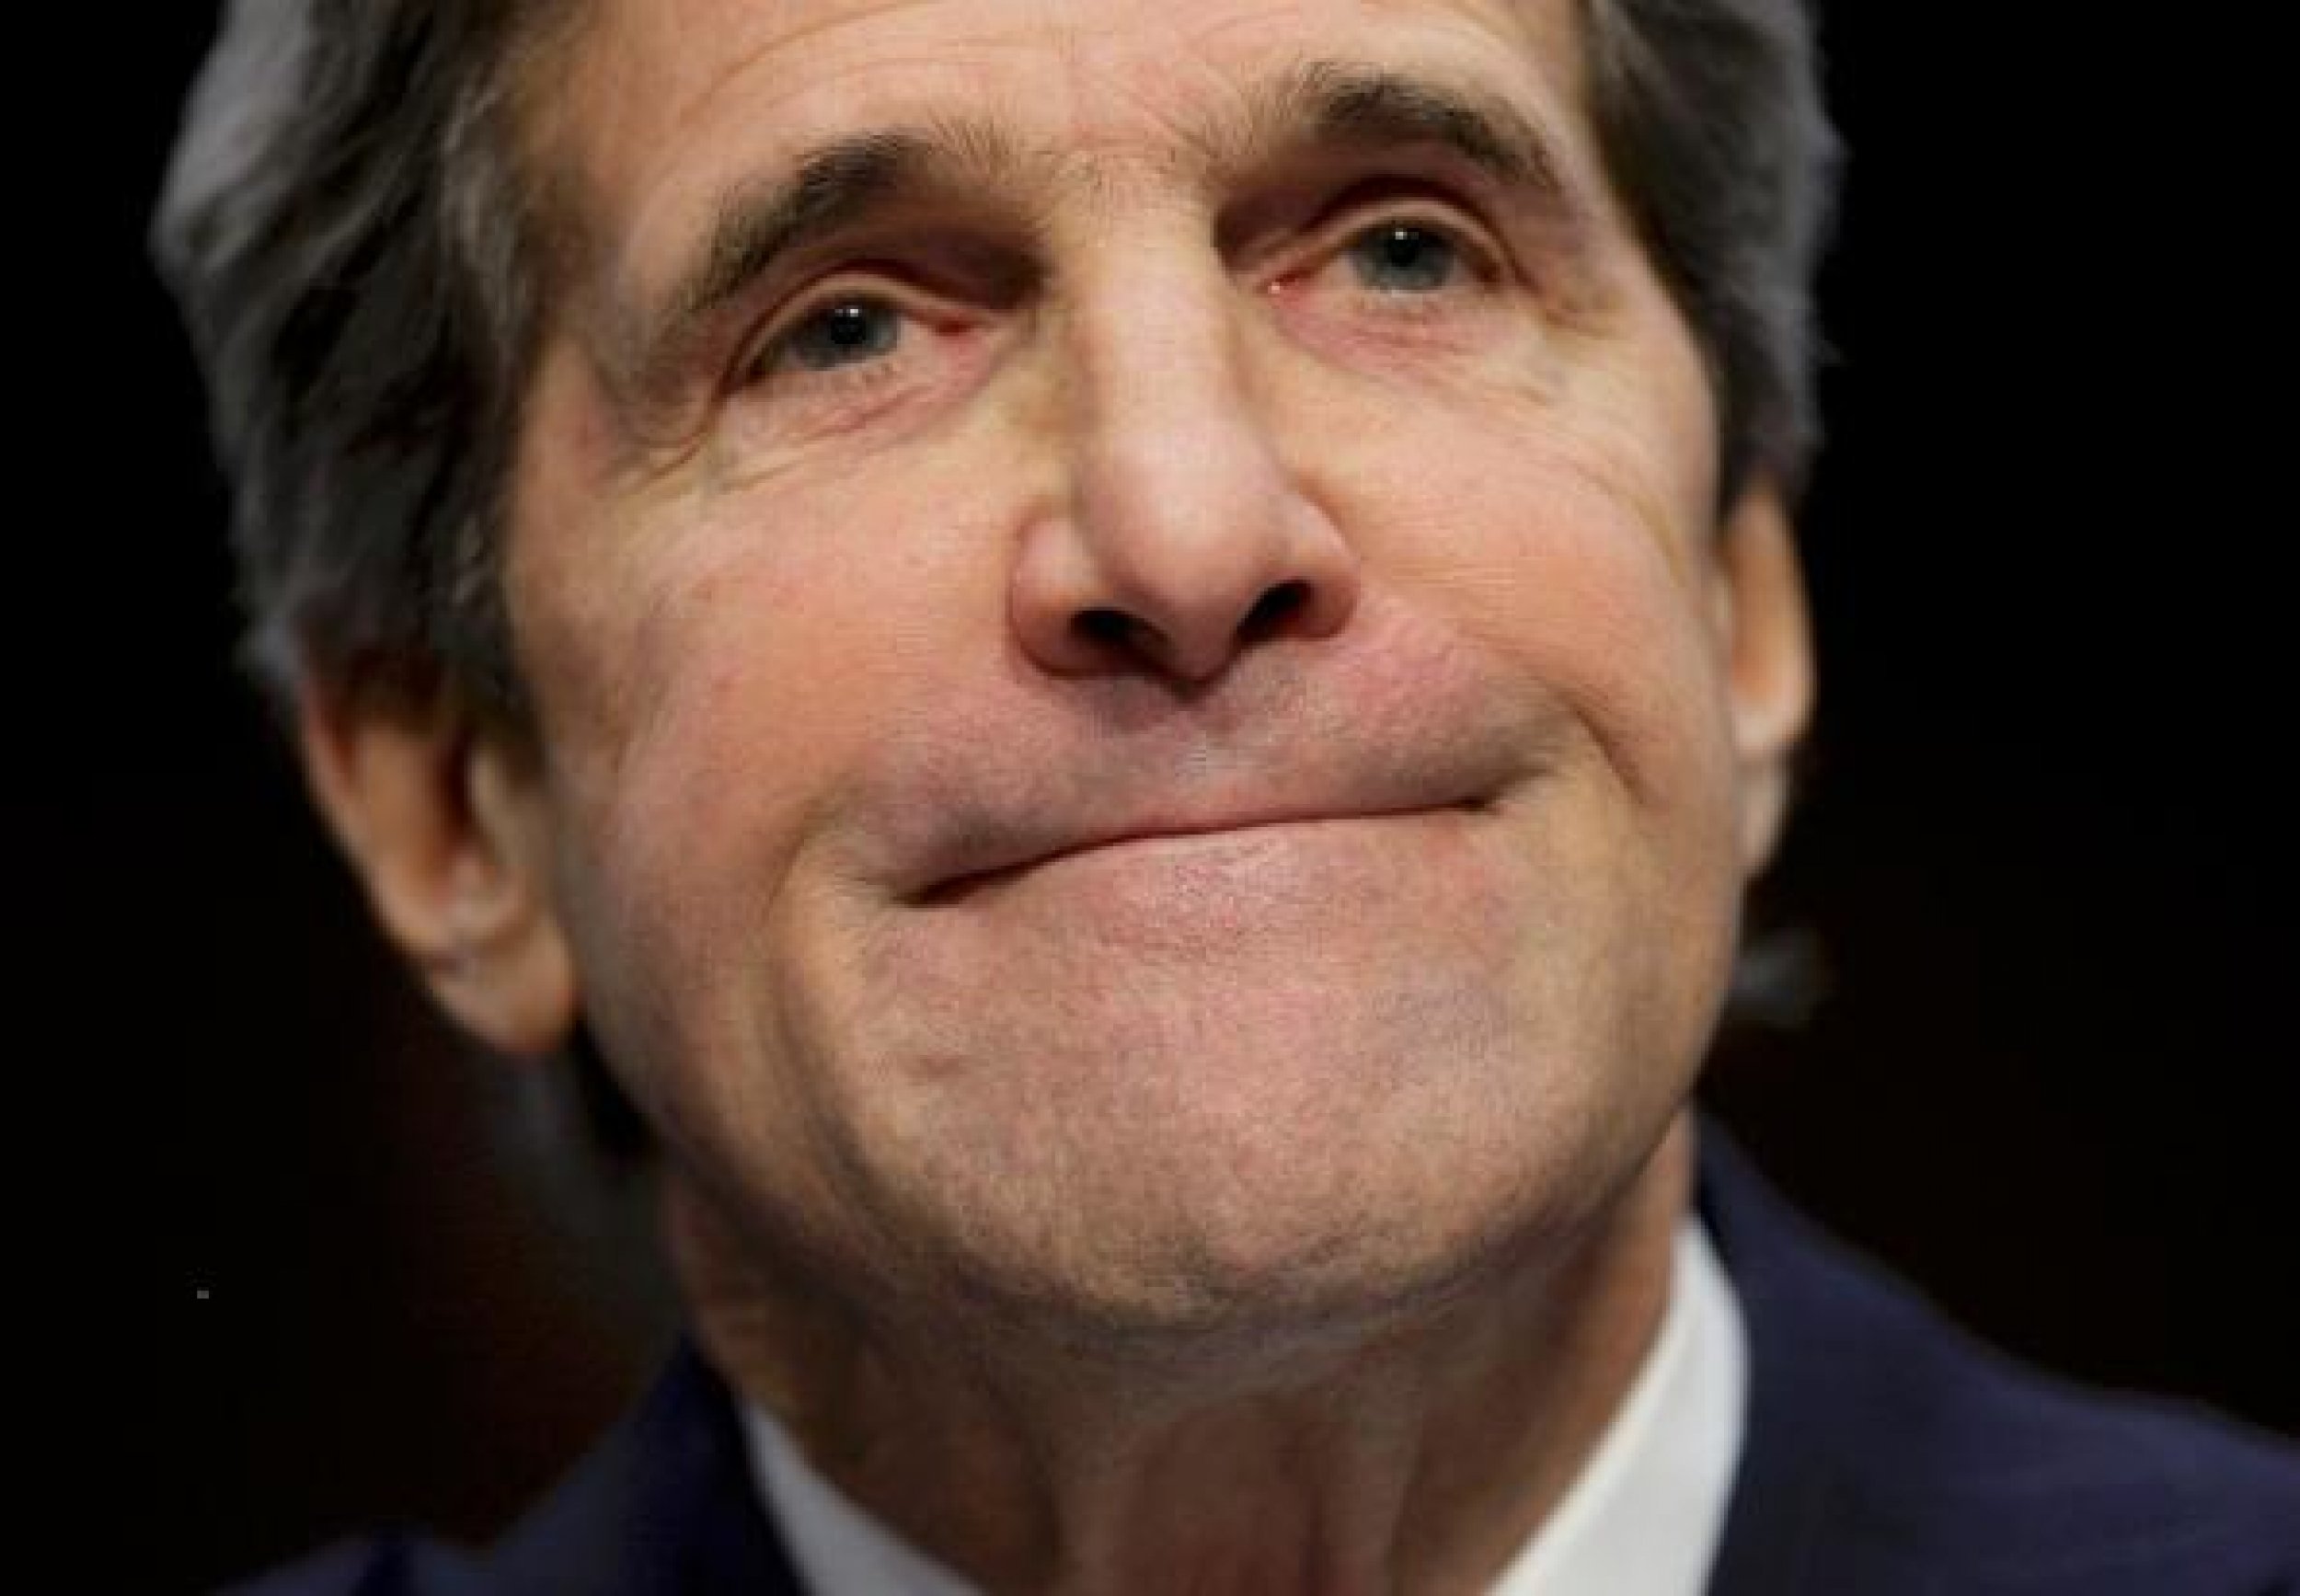 Kerry Begins Confirmation Process For Secretary Of State Post